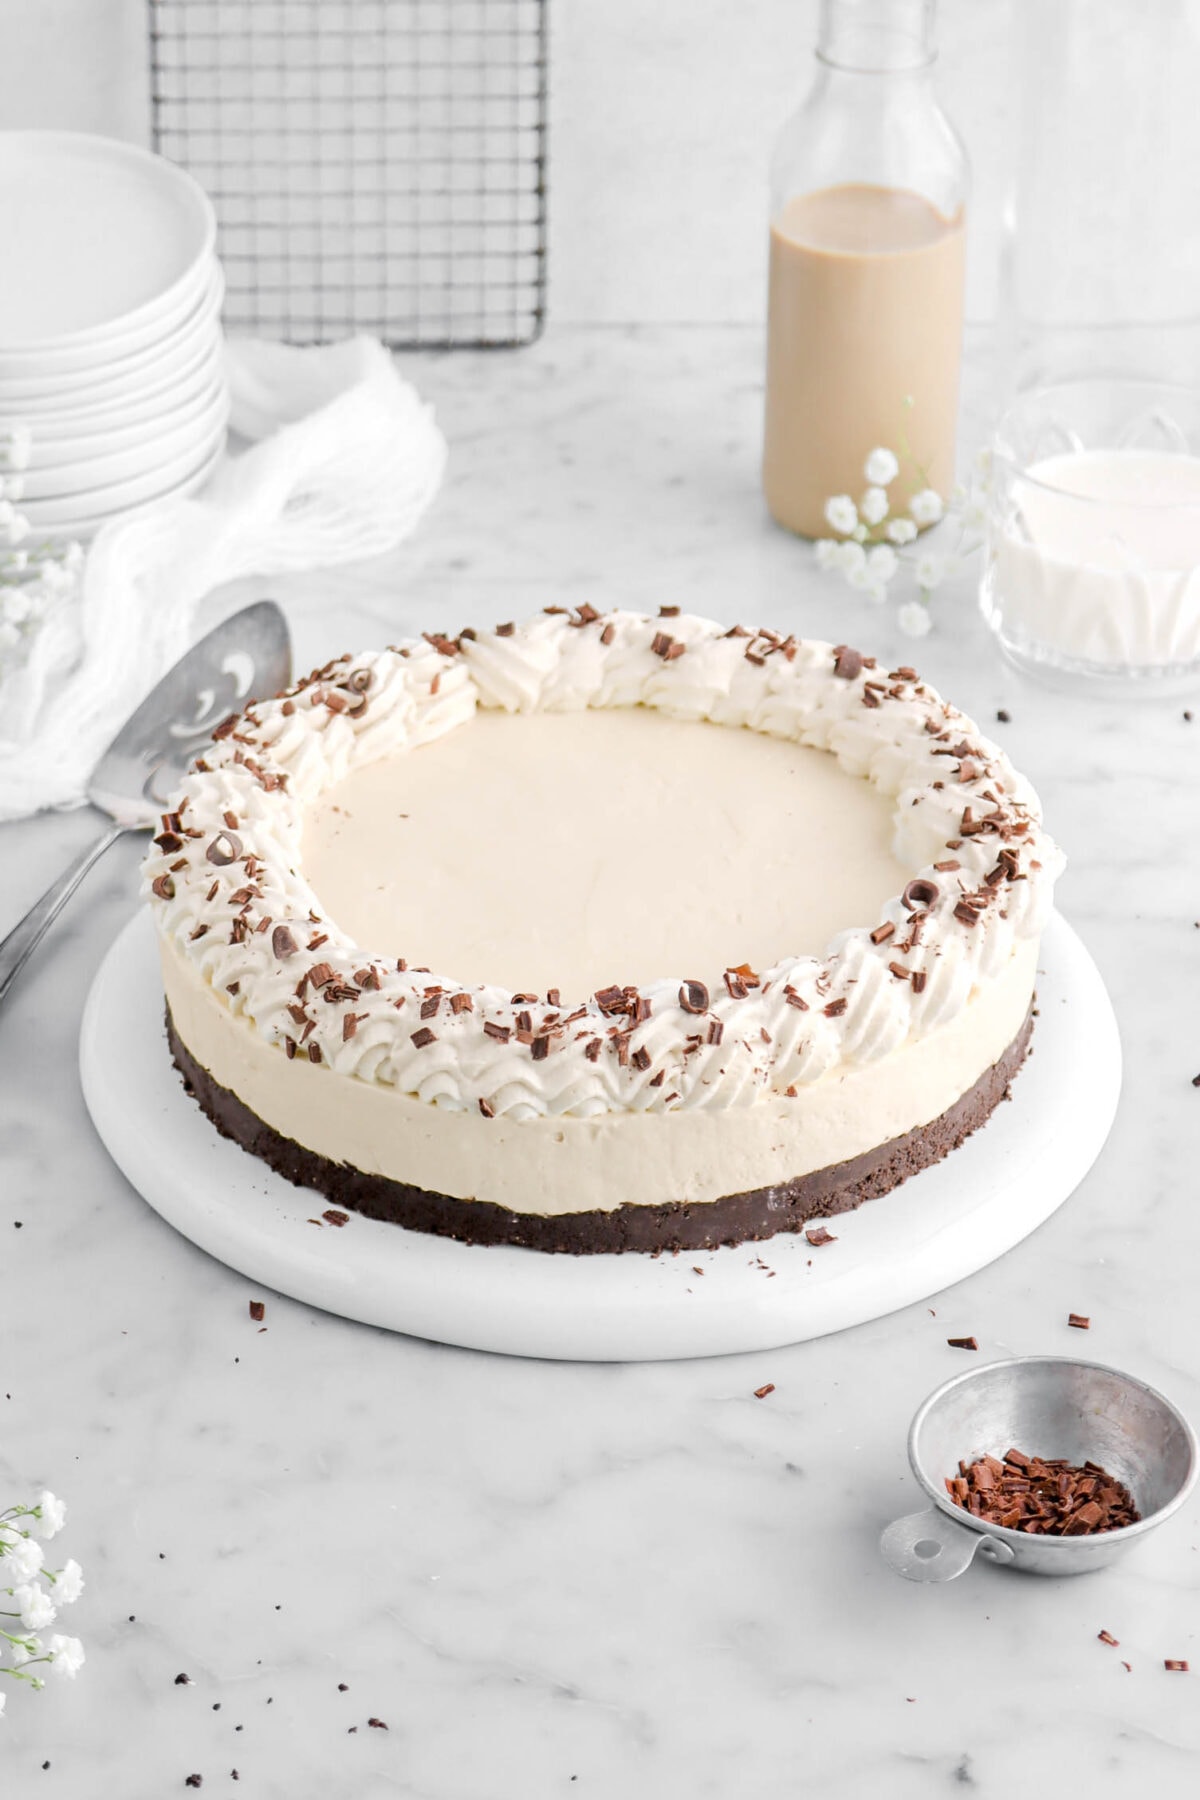 angled shot of irish cream cheesecake on upside down white palte with a cake knife, measuring cup of chocolate curls, and white flowers around on marble surface.